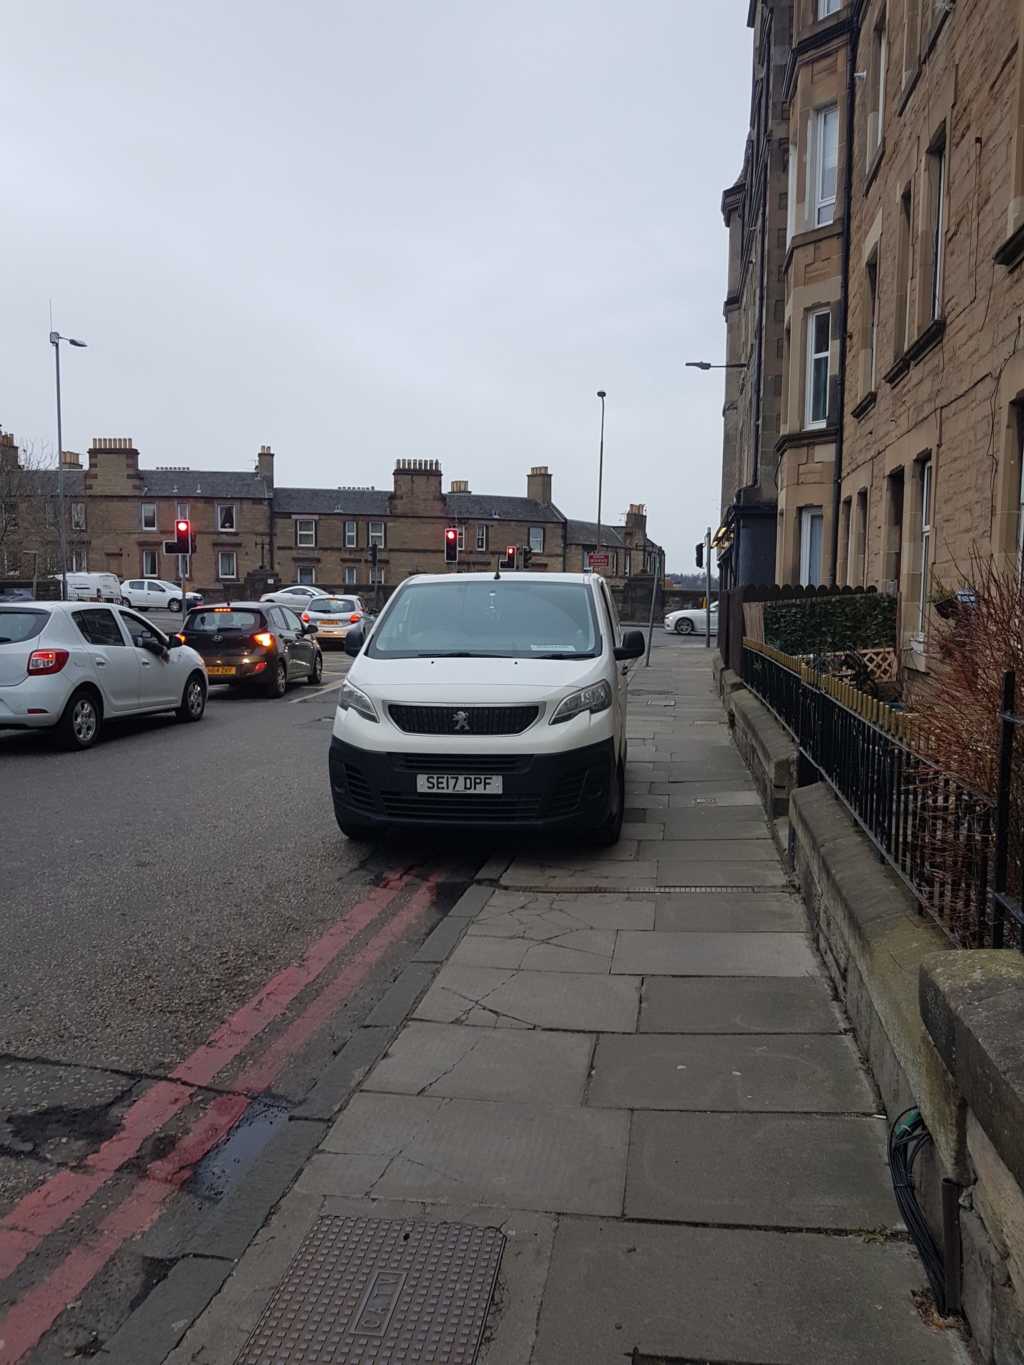 SE17 DPF displaying Inconsiderate Parking